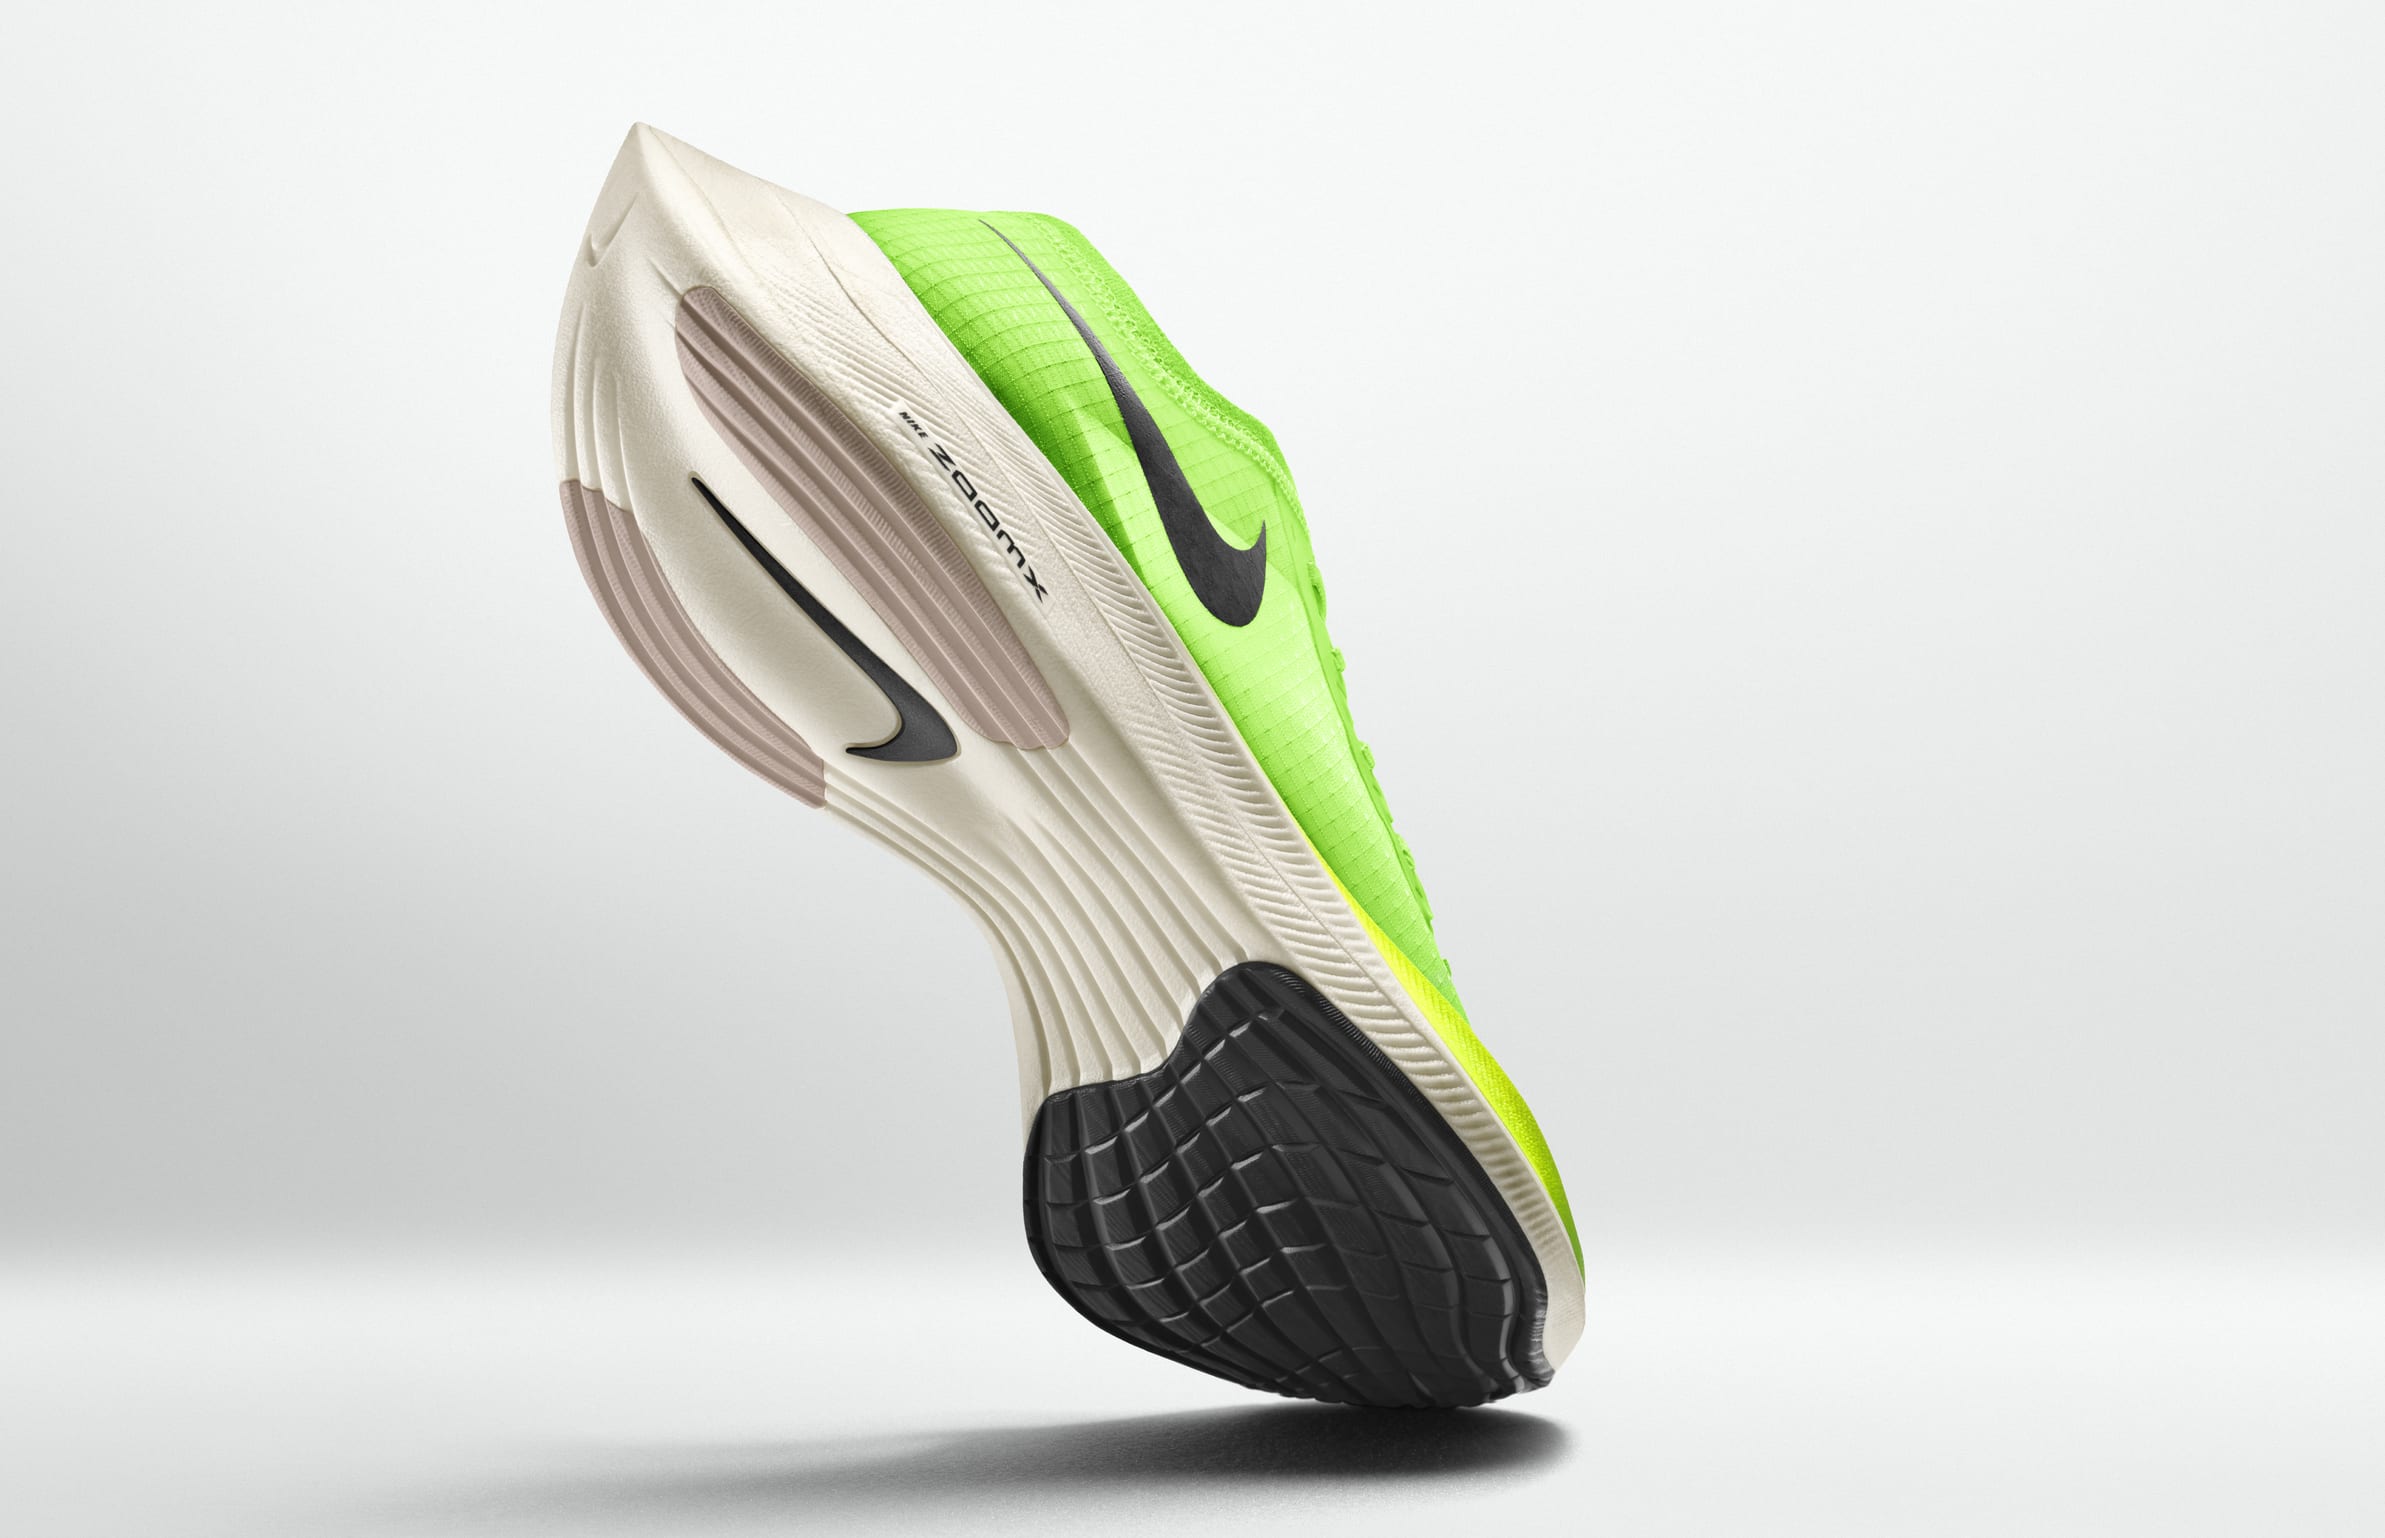 Nike ZoomX Vaporfly Next% (Lateral Sole)